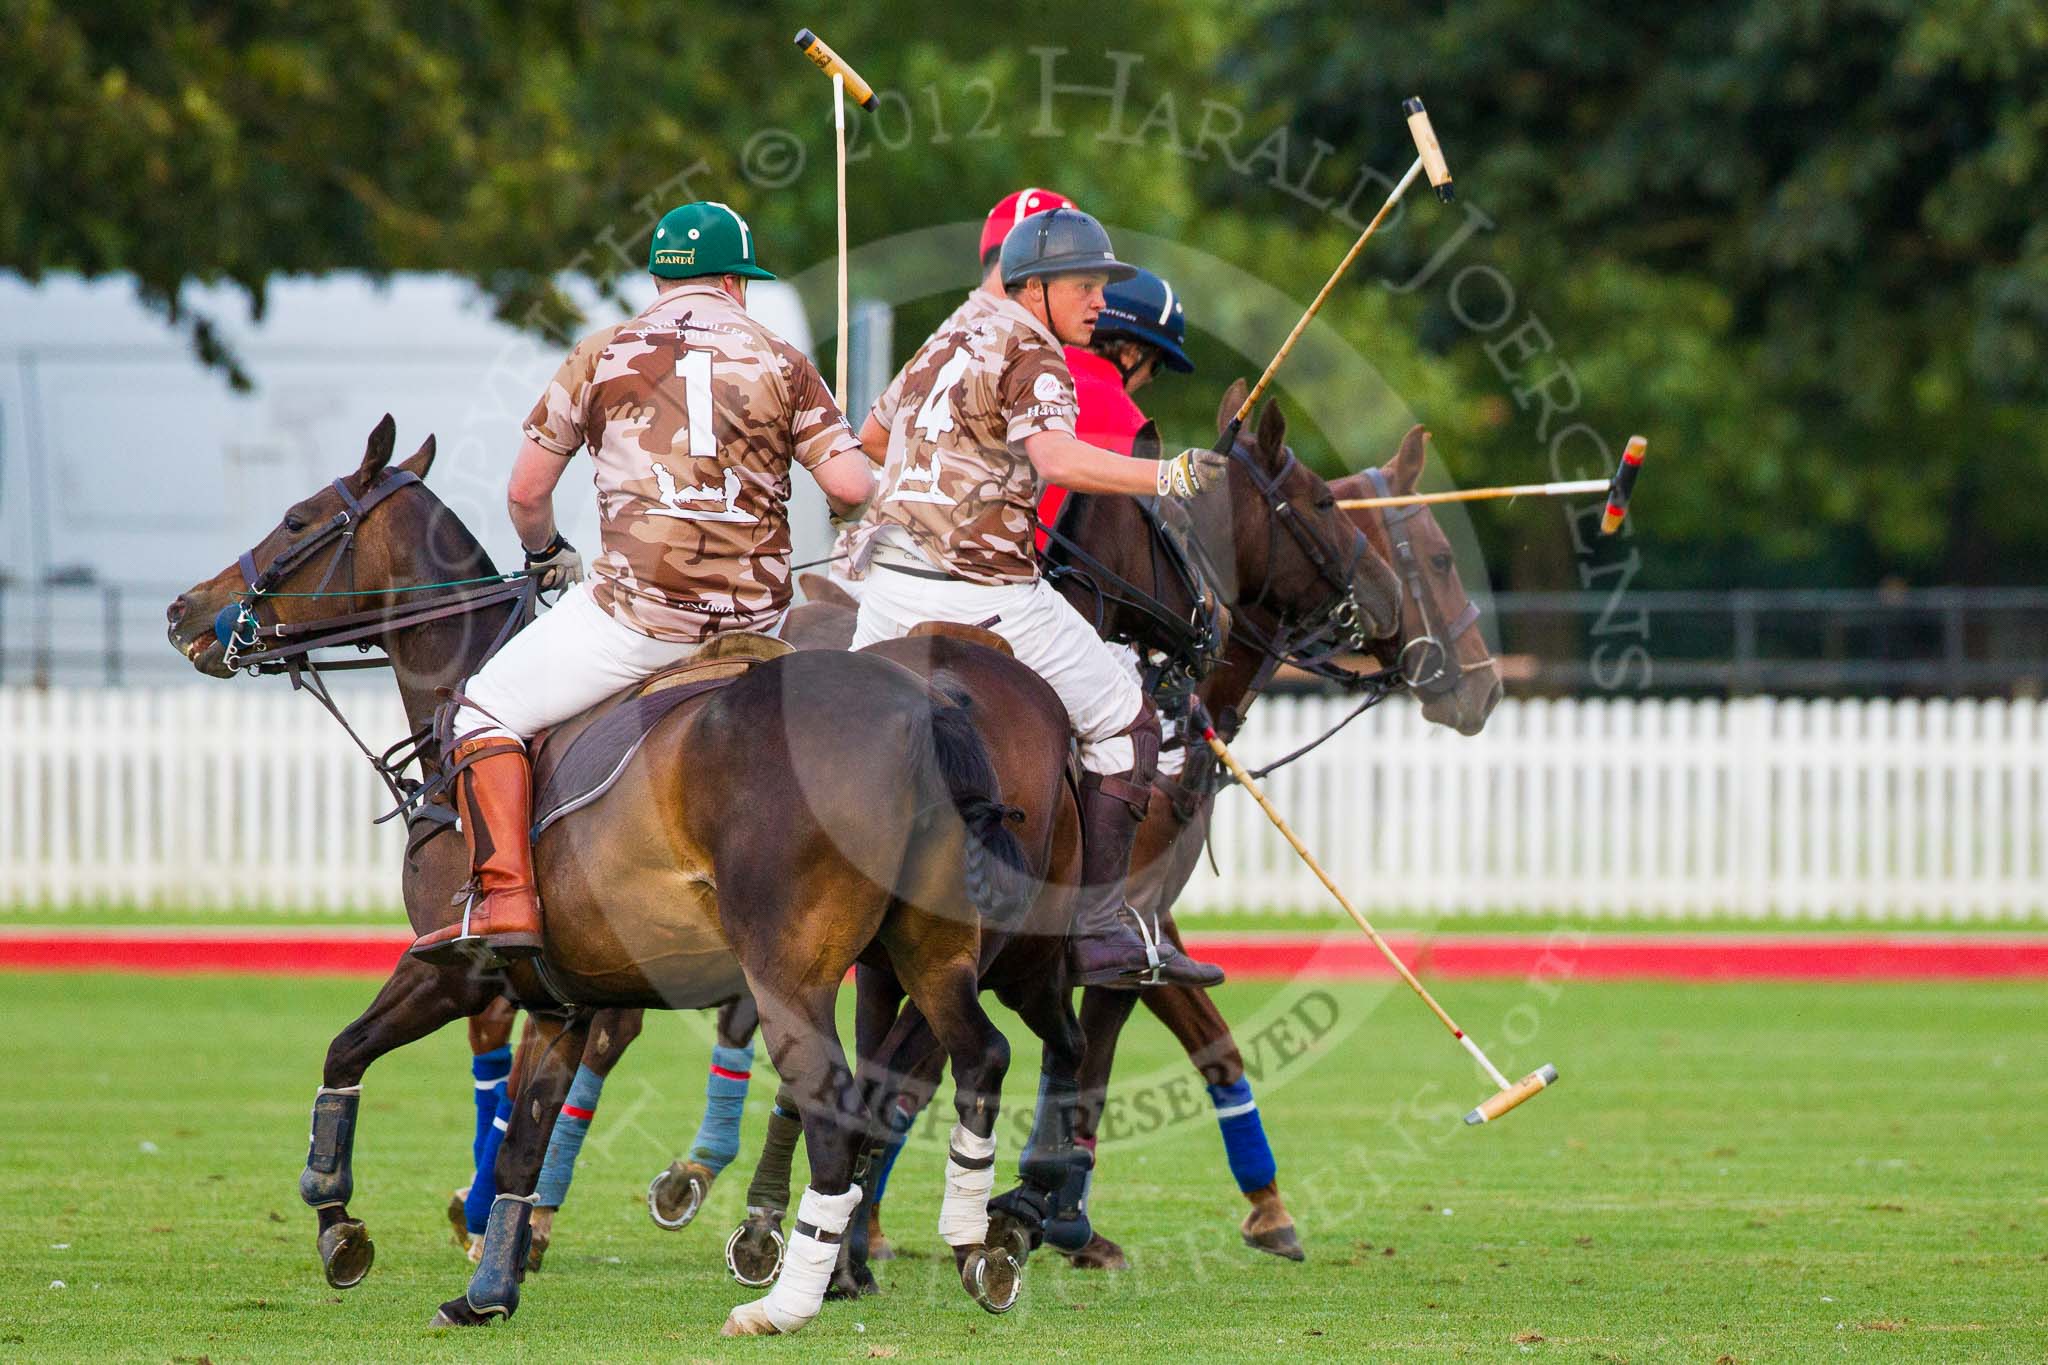 DBPC Polo in the Park 2012: Royal Artillery #1, Bombardier Richard Morris, #2, Alex Vent, #2, Major Andy Wood, and DBPC #3, Mark Weller..
Dallas Burston Polo Club,
Stoneythorpe Estate,
Southam,
Warwickshire,
United Kingdom,
on 16 September 2012 at 18:37, image #327